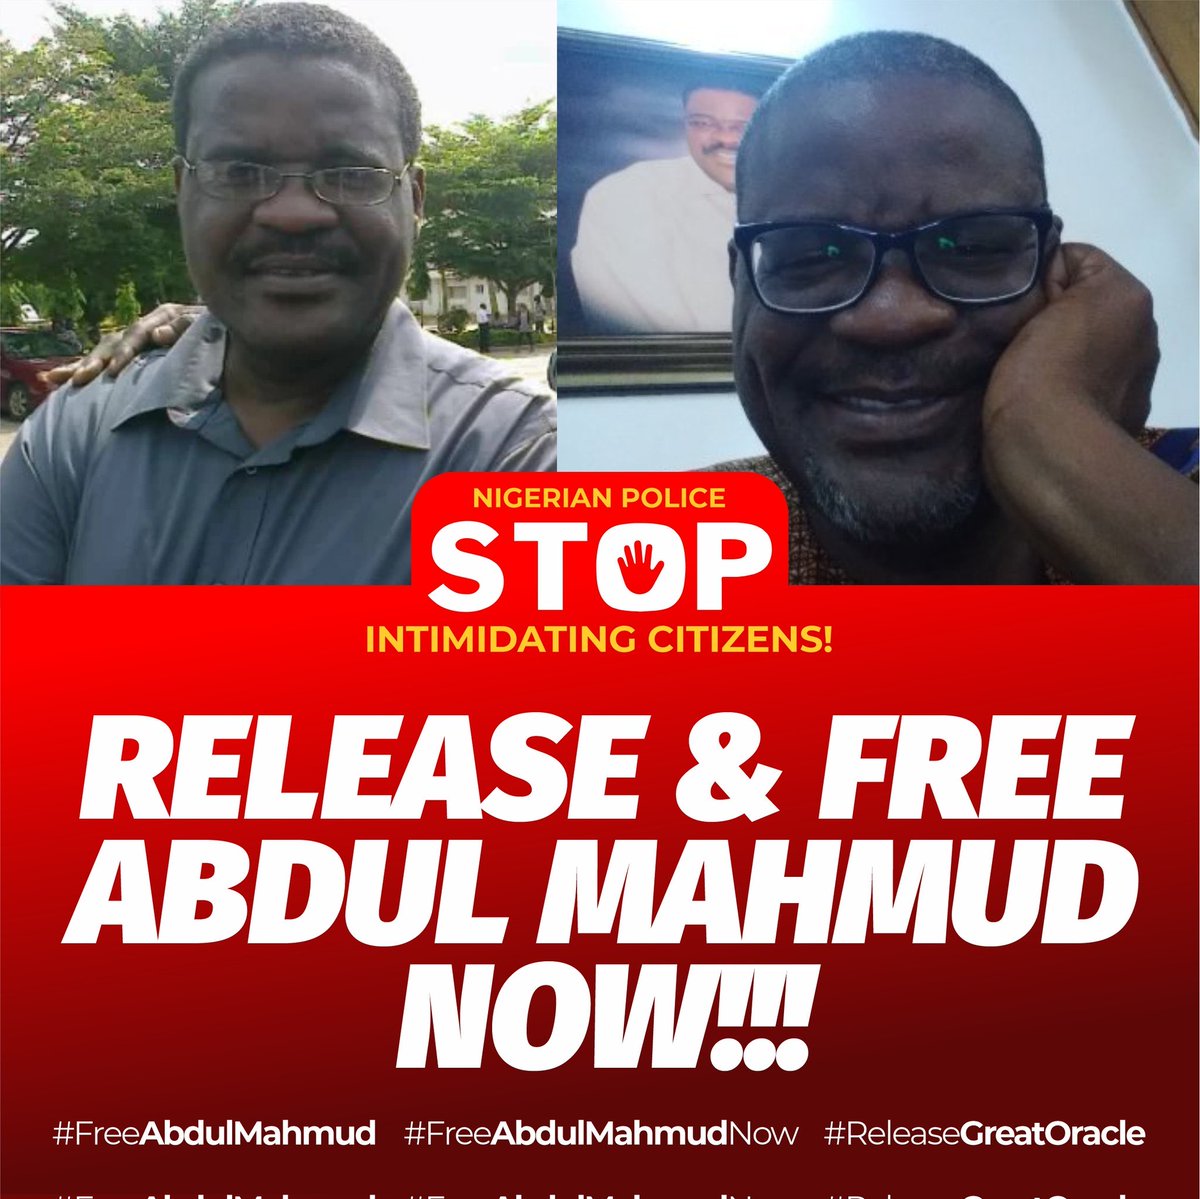 Breaking News 🗞️ Alert 🚨:
Our brother The Great Oracle @AbdulMahmud01 has just been released and He called into our space to confirm He is a free man Again!!!
Special thanks to all #OBIDIENTs and well meaning Nigerians for speaking up against Injustice. 
Nigeria 🇳🇬 must work !…